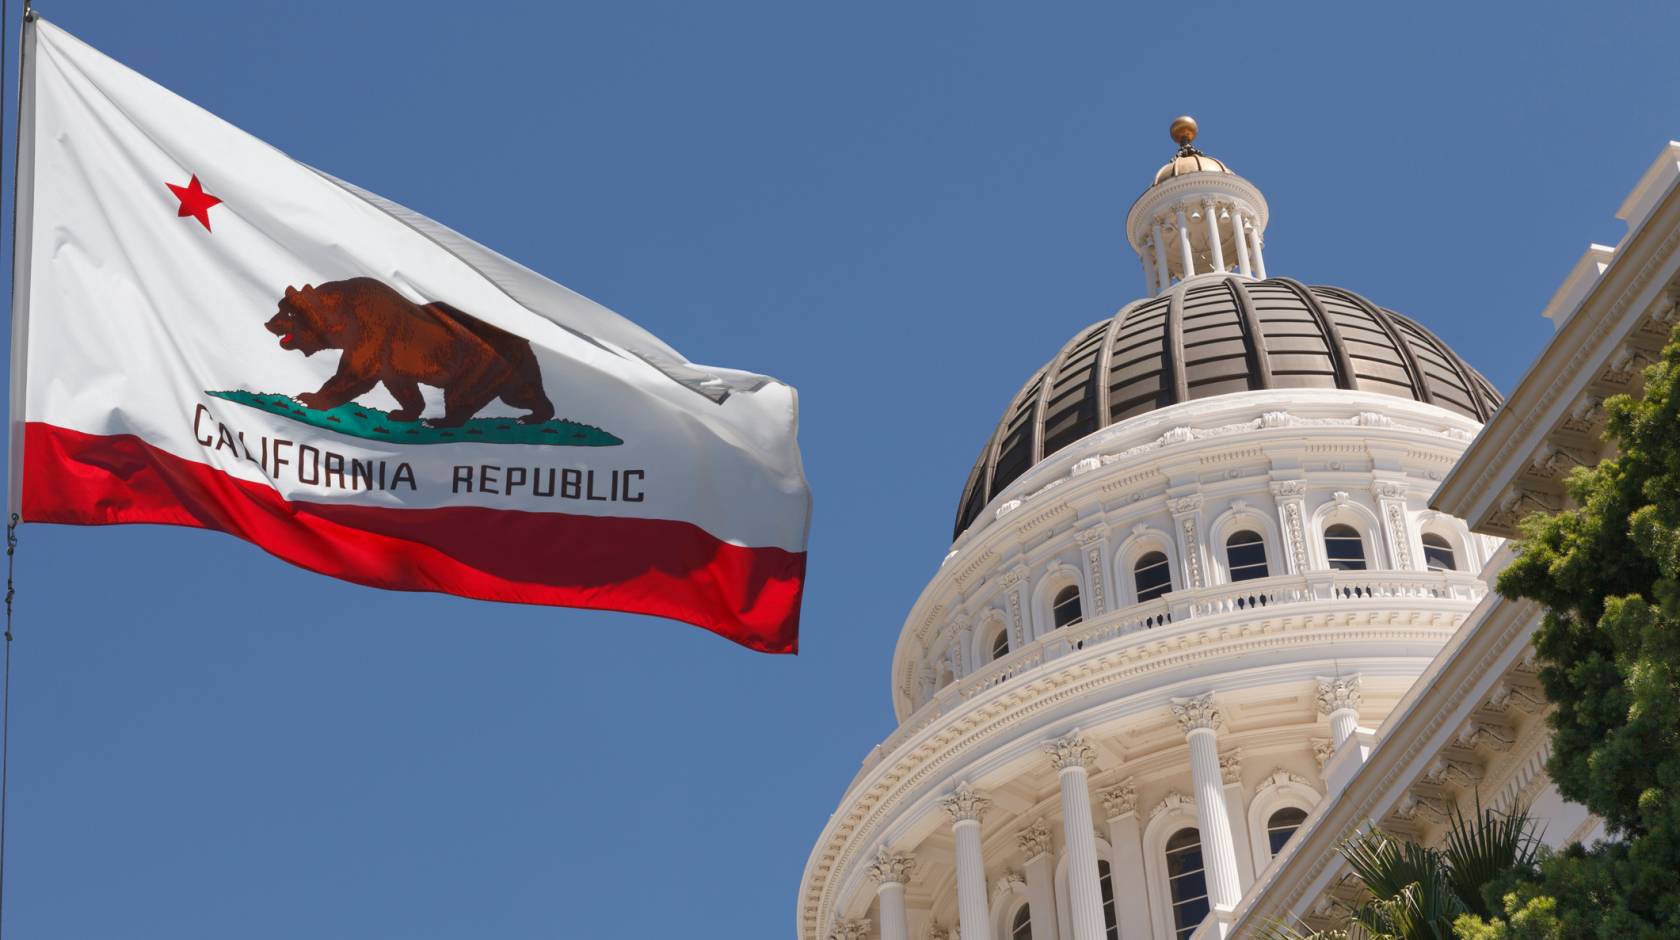 California flag flying outside the capitol building in Sacramento